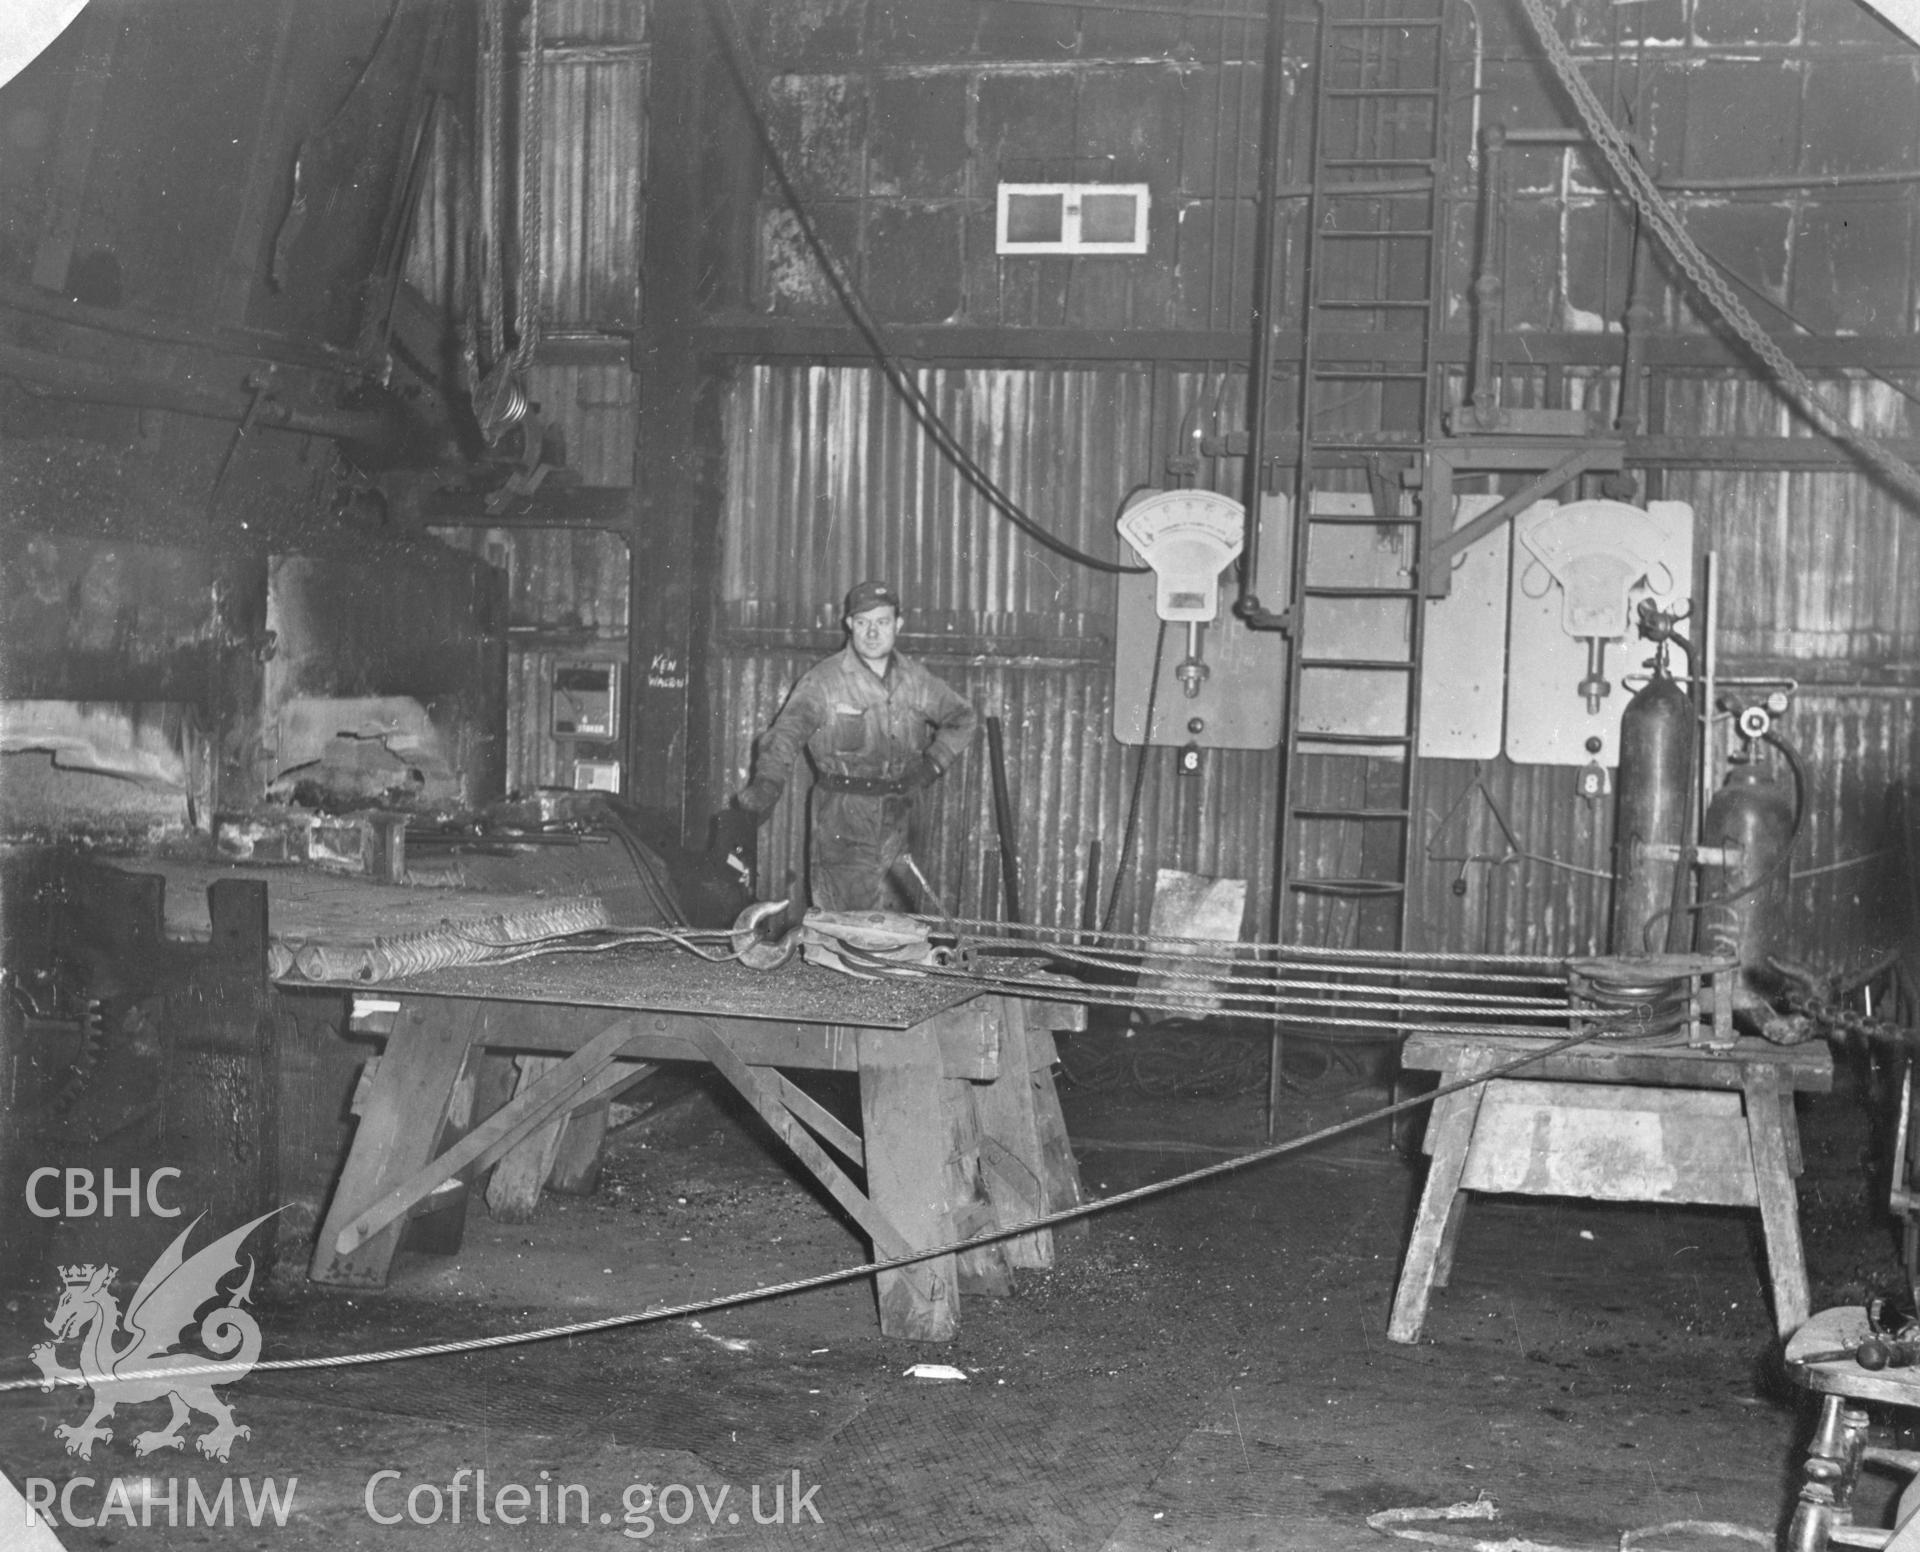 Black and white acetate negative showing working men at an unidentified industrial building in or near Llanelli.